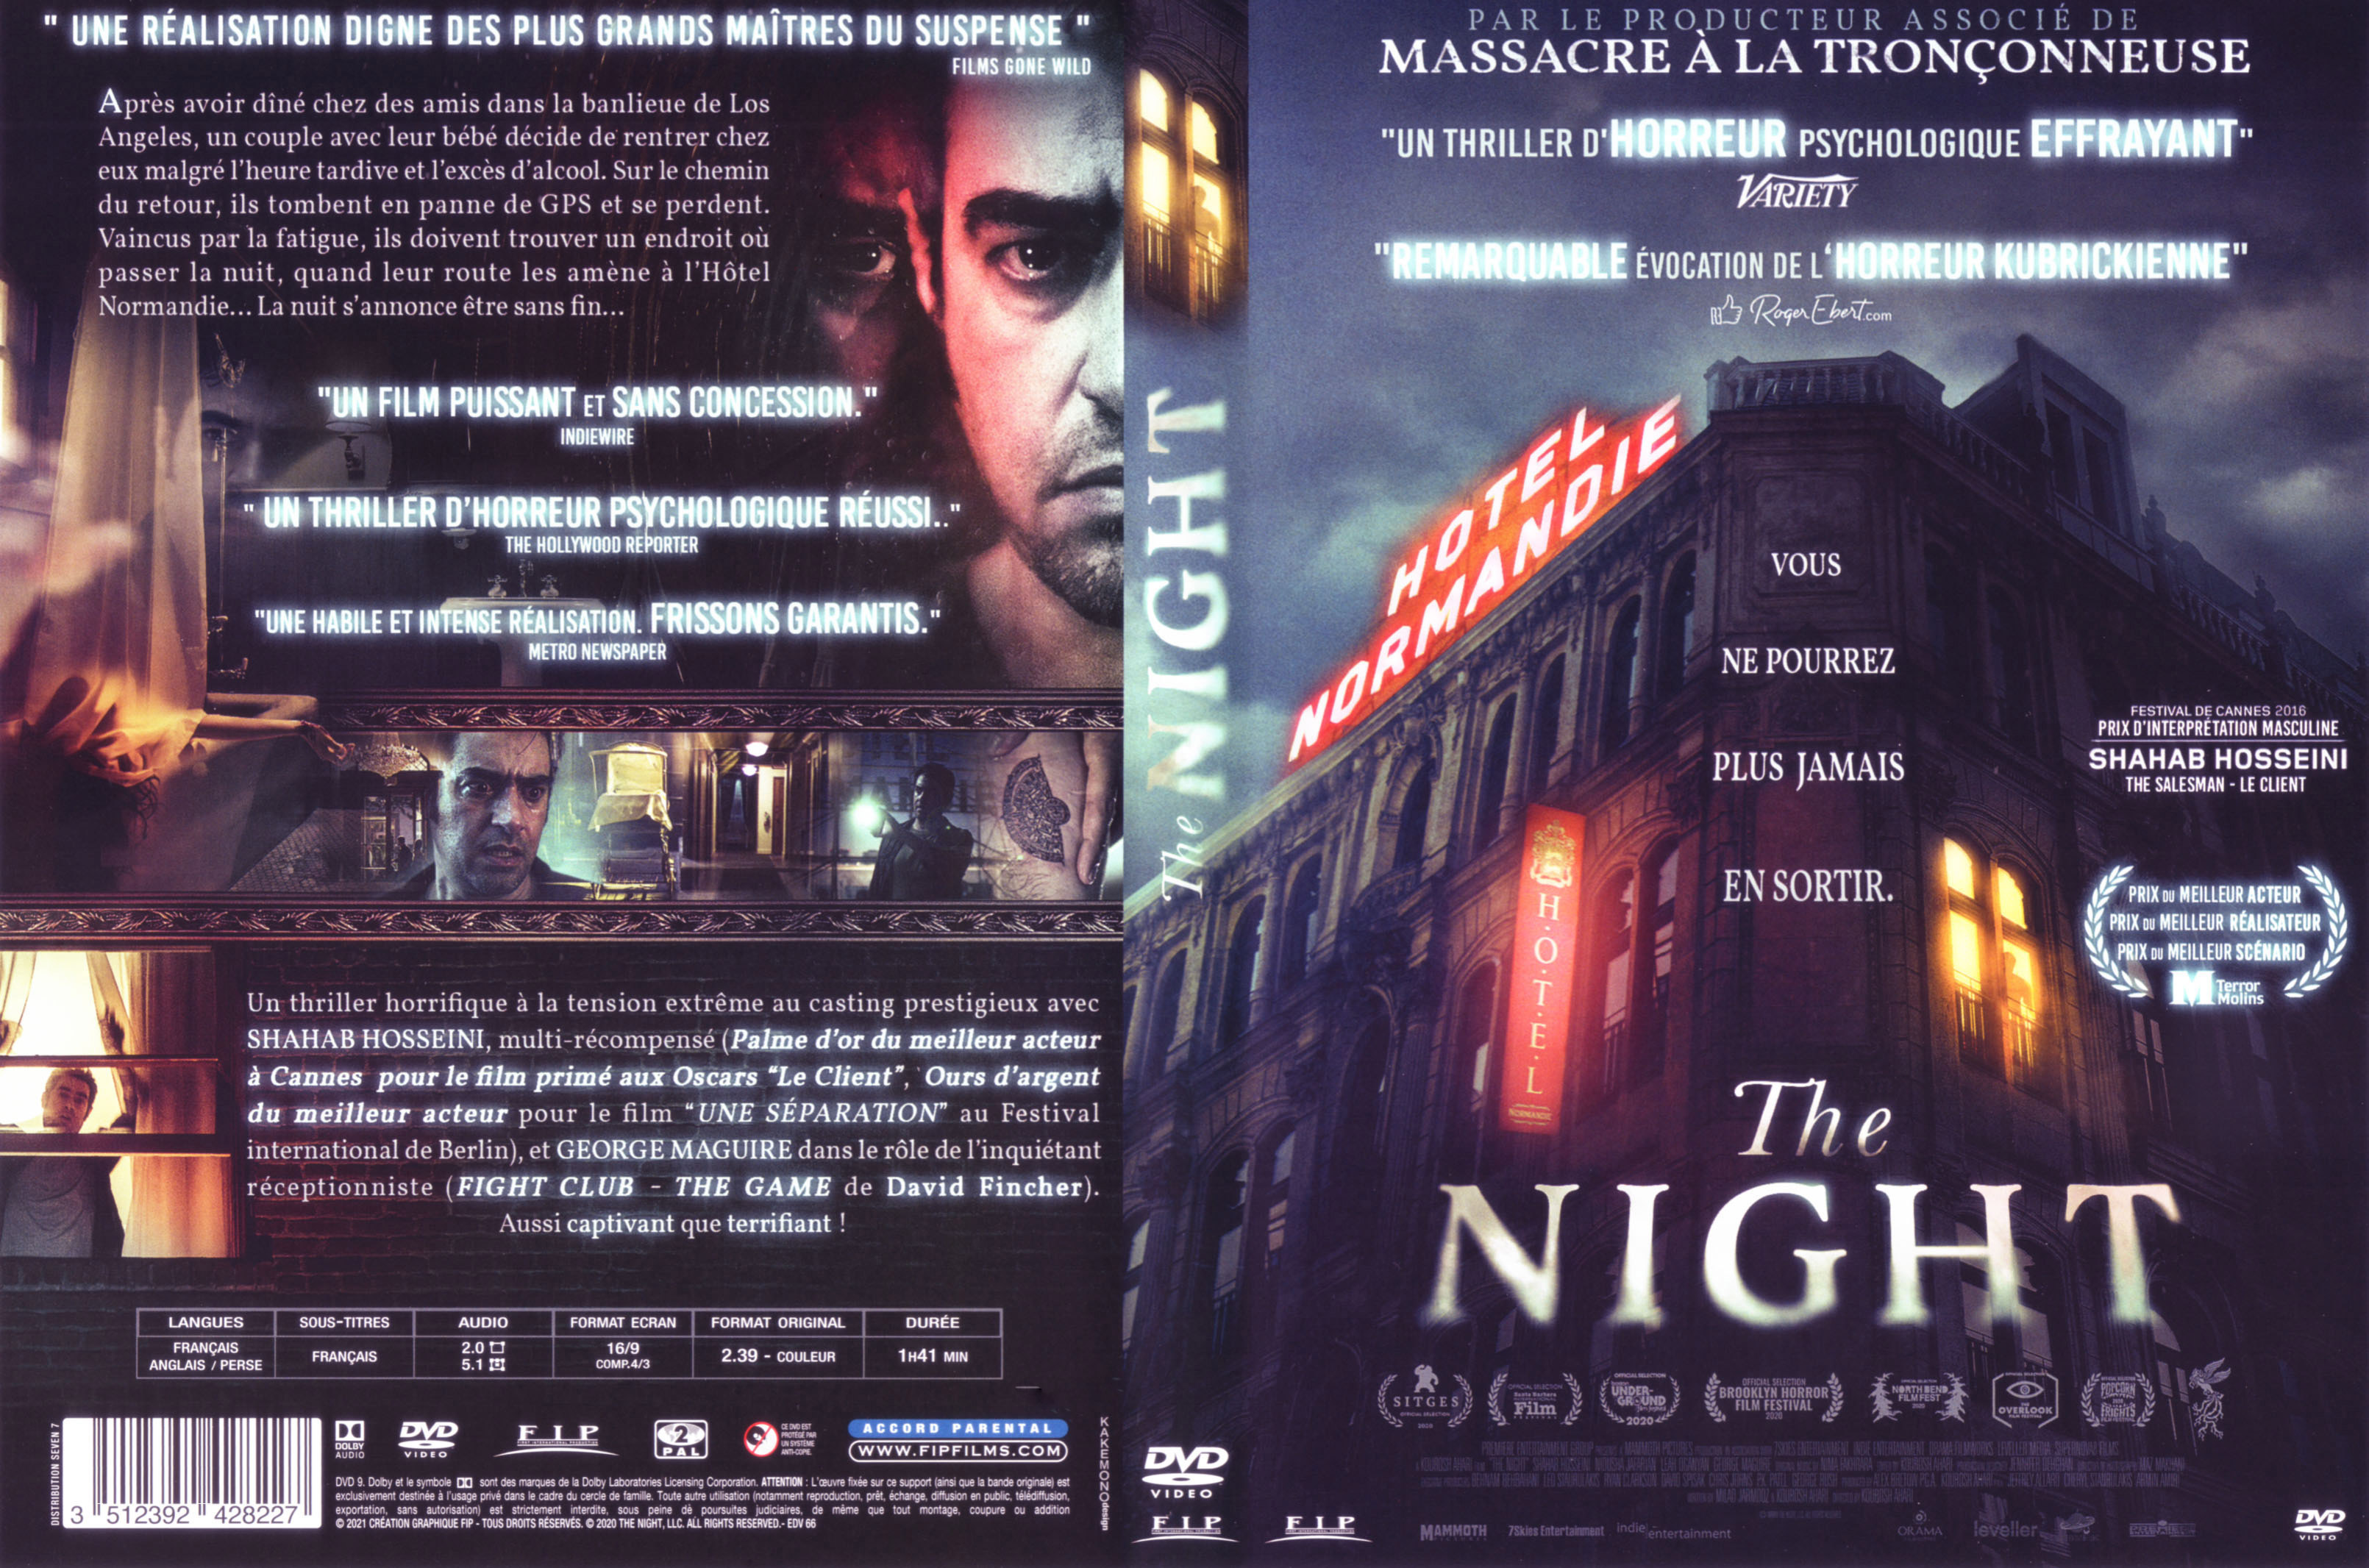 Jaquette DVD The night (2020)